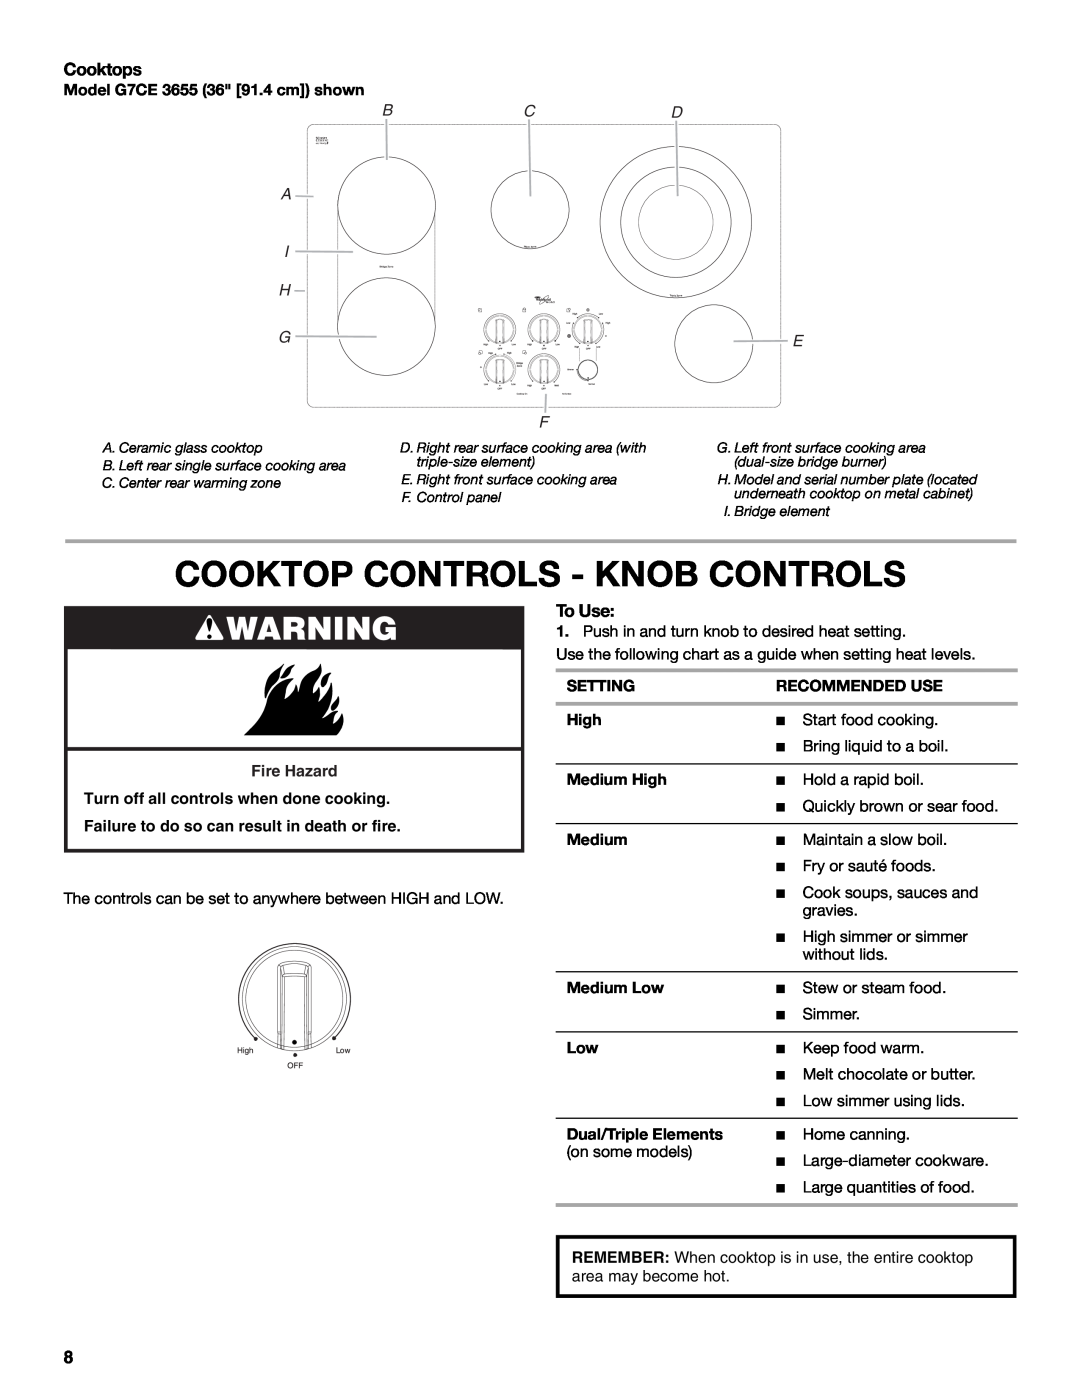 Whirlpool G7CE3055XS, G7CE3034XP, G7CE3034XB manual Cooktop Controls - Knob Controls, Cooktops, B A I H G, Cd E F, To Use 